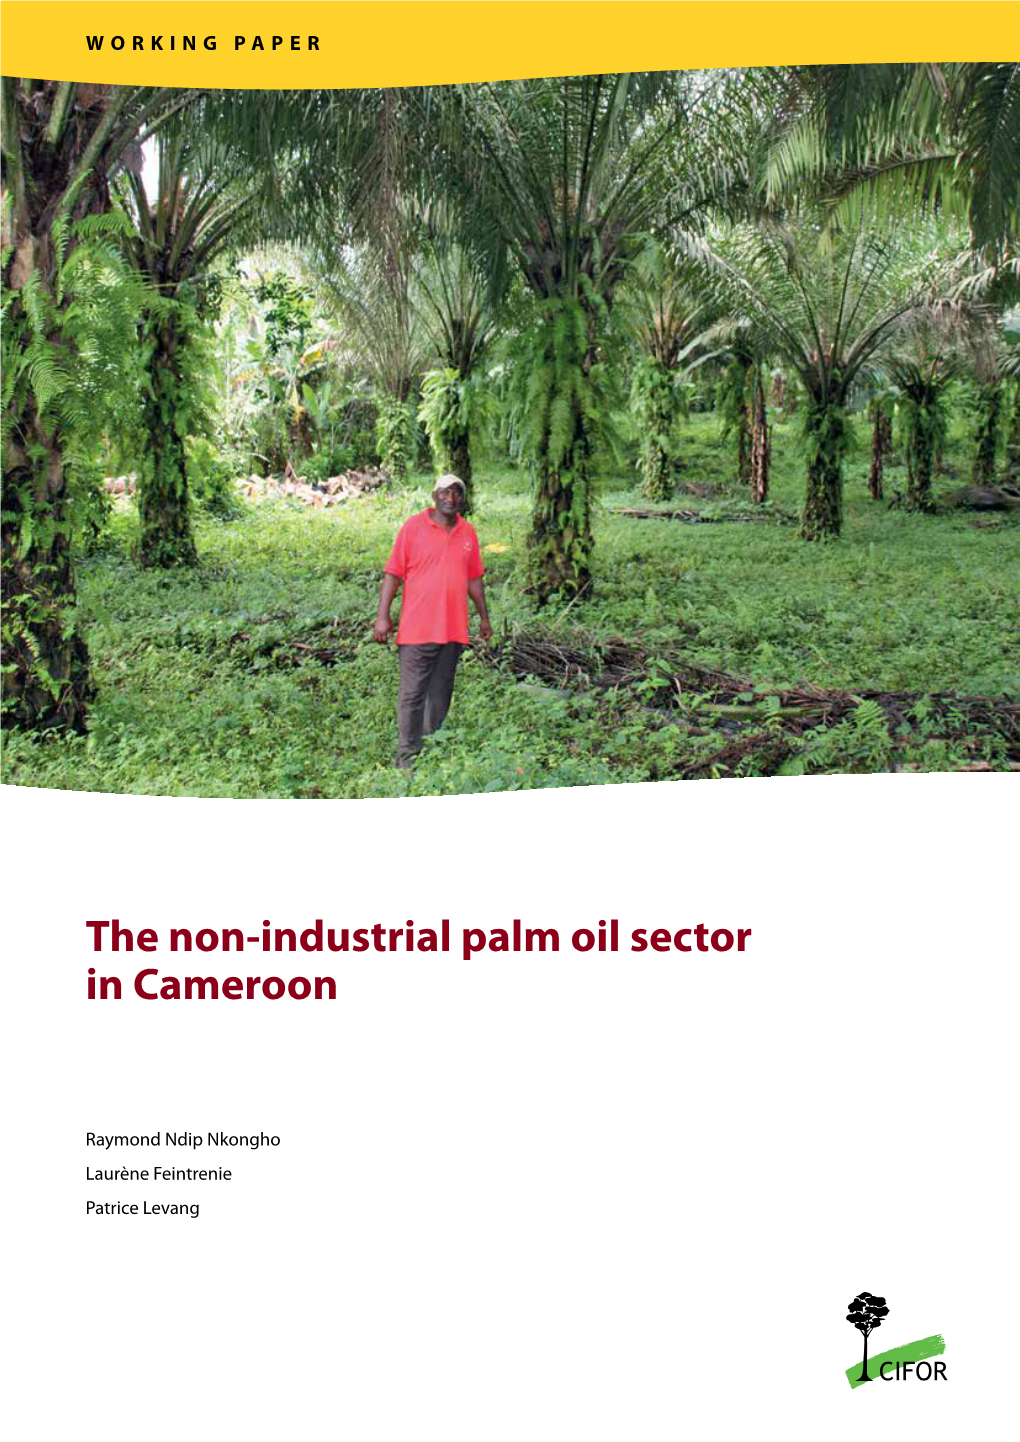 The Non-Industrial Palm Oil Sector in Cameroon